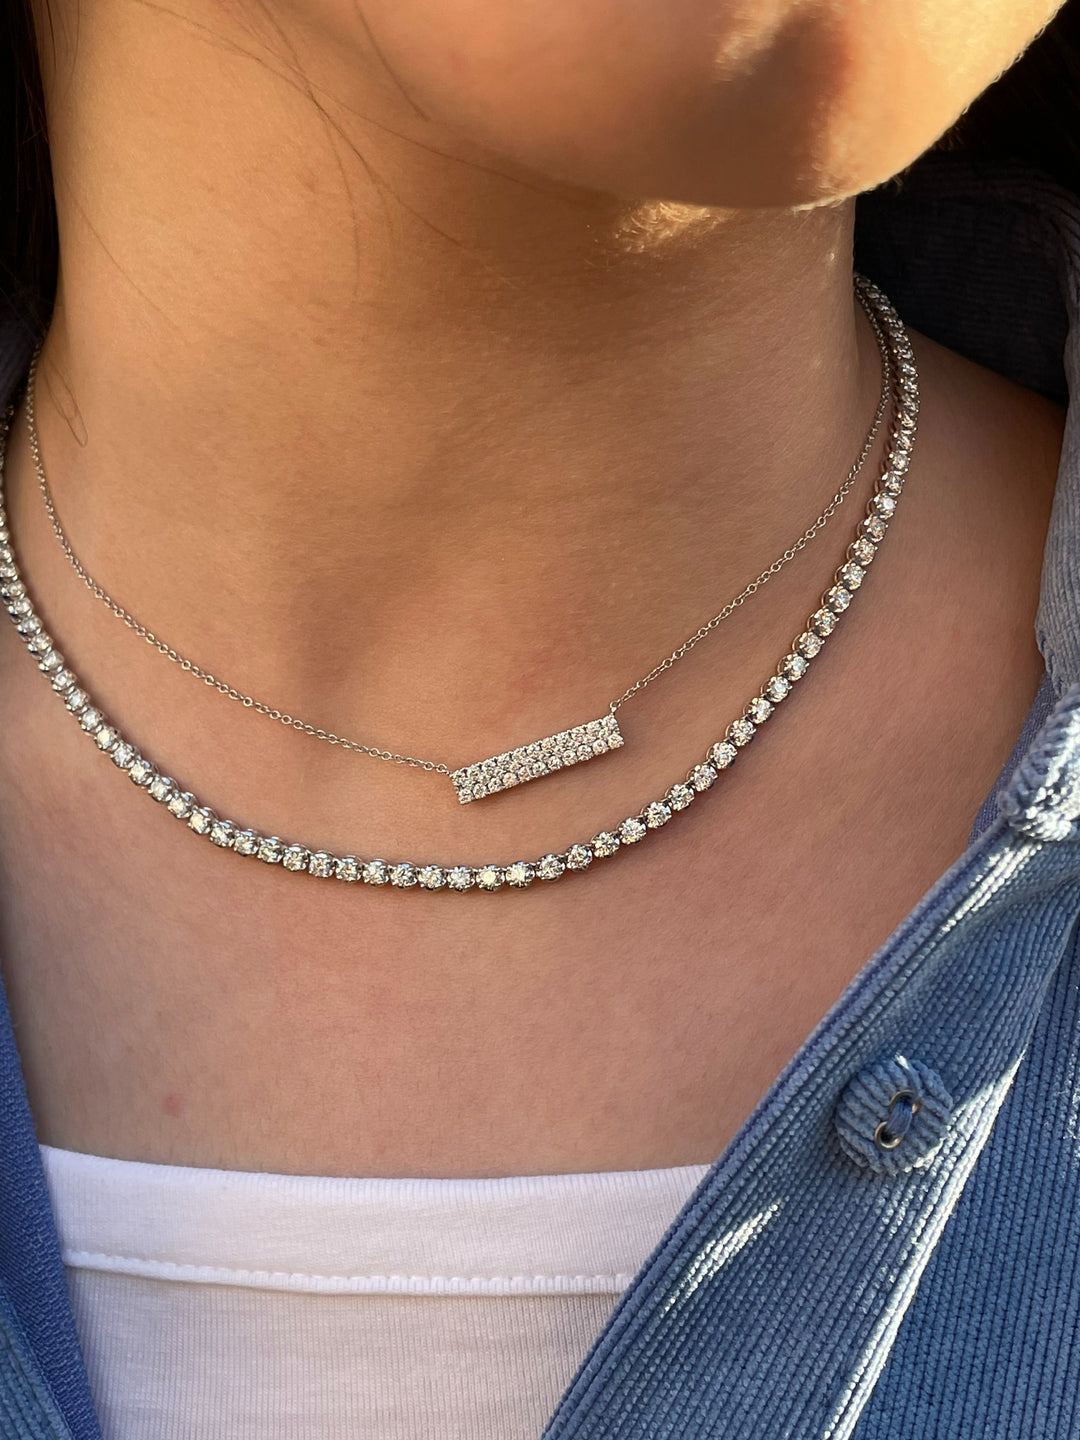 Diamond Pendant Necklaces for Every Occasion